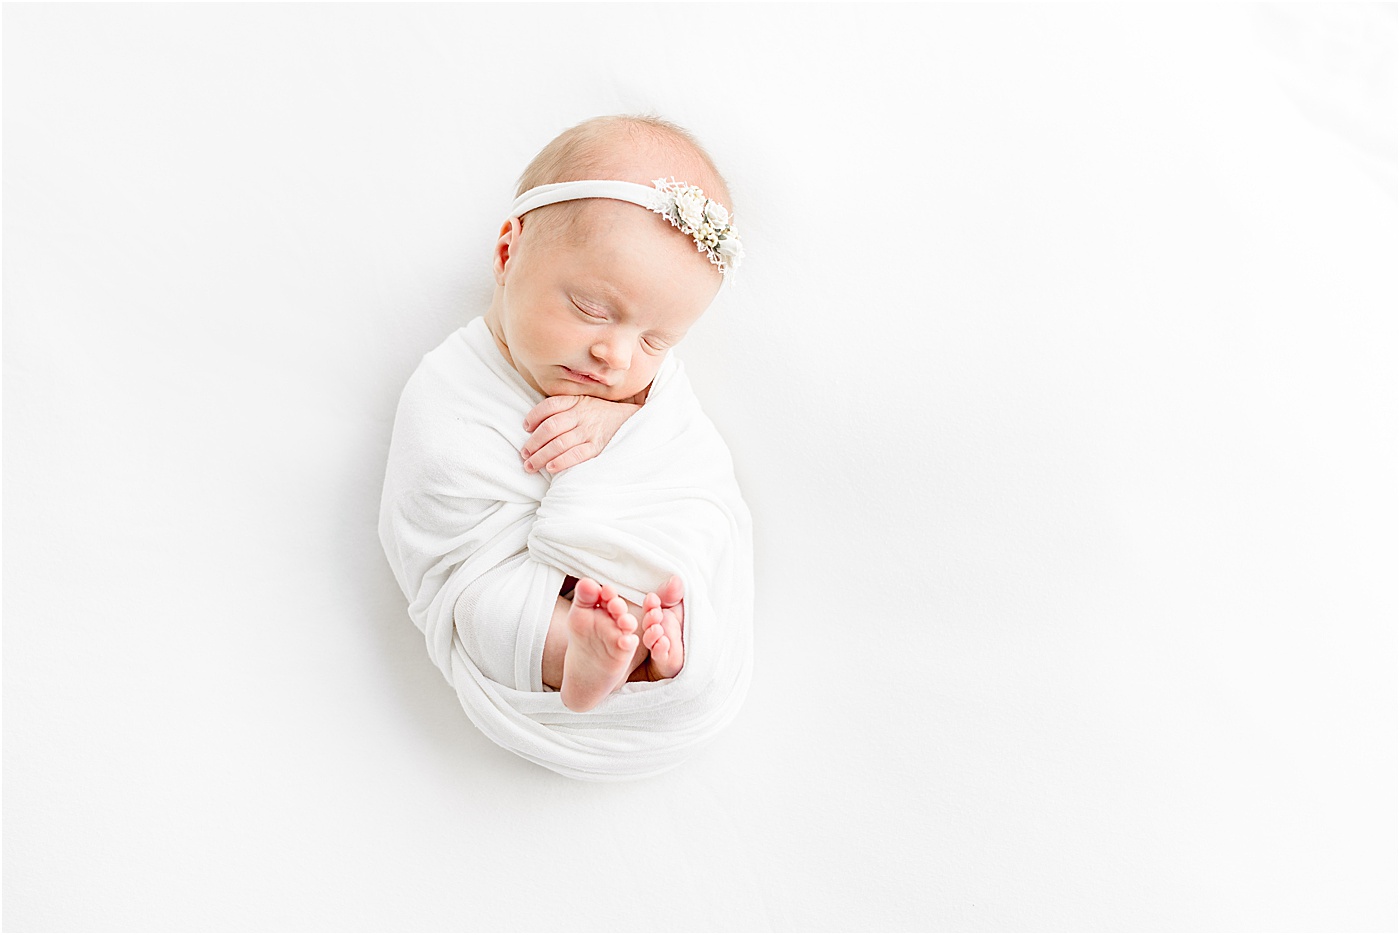 Wide angle photo of baby girl in white swaddle sleeping during newborn photos. Photo by Sana Ahmed Photography.